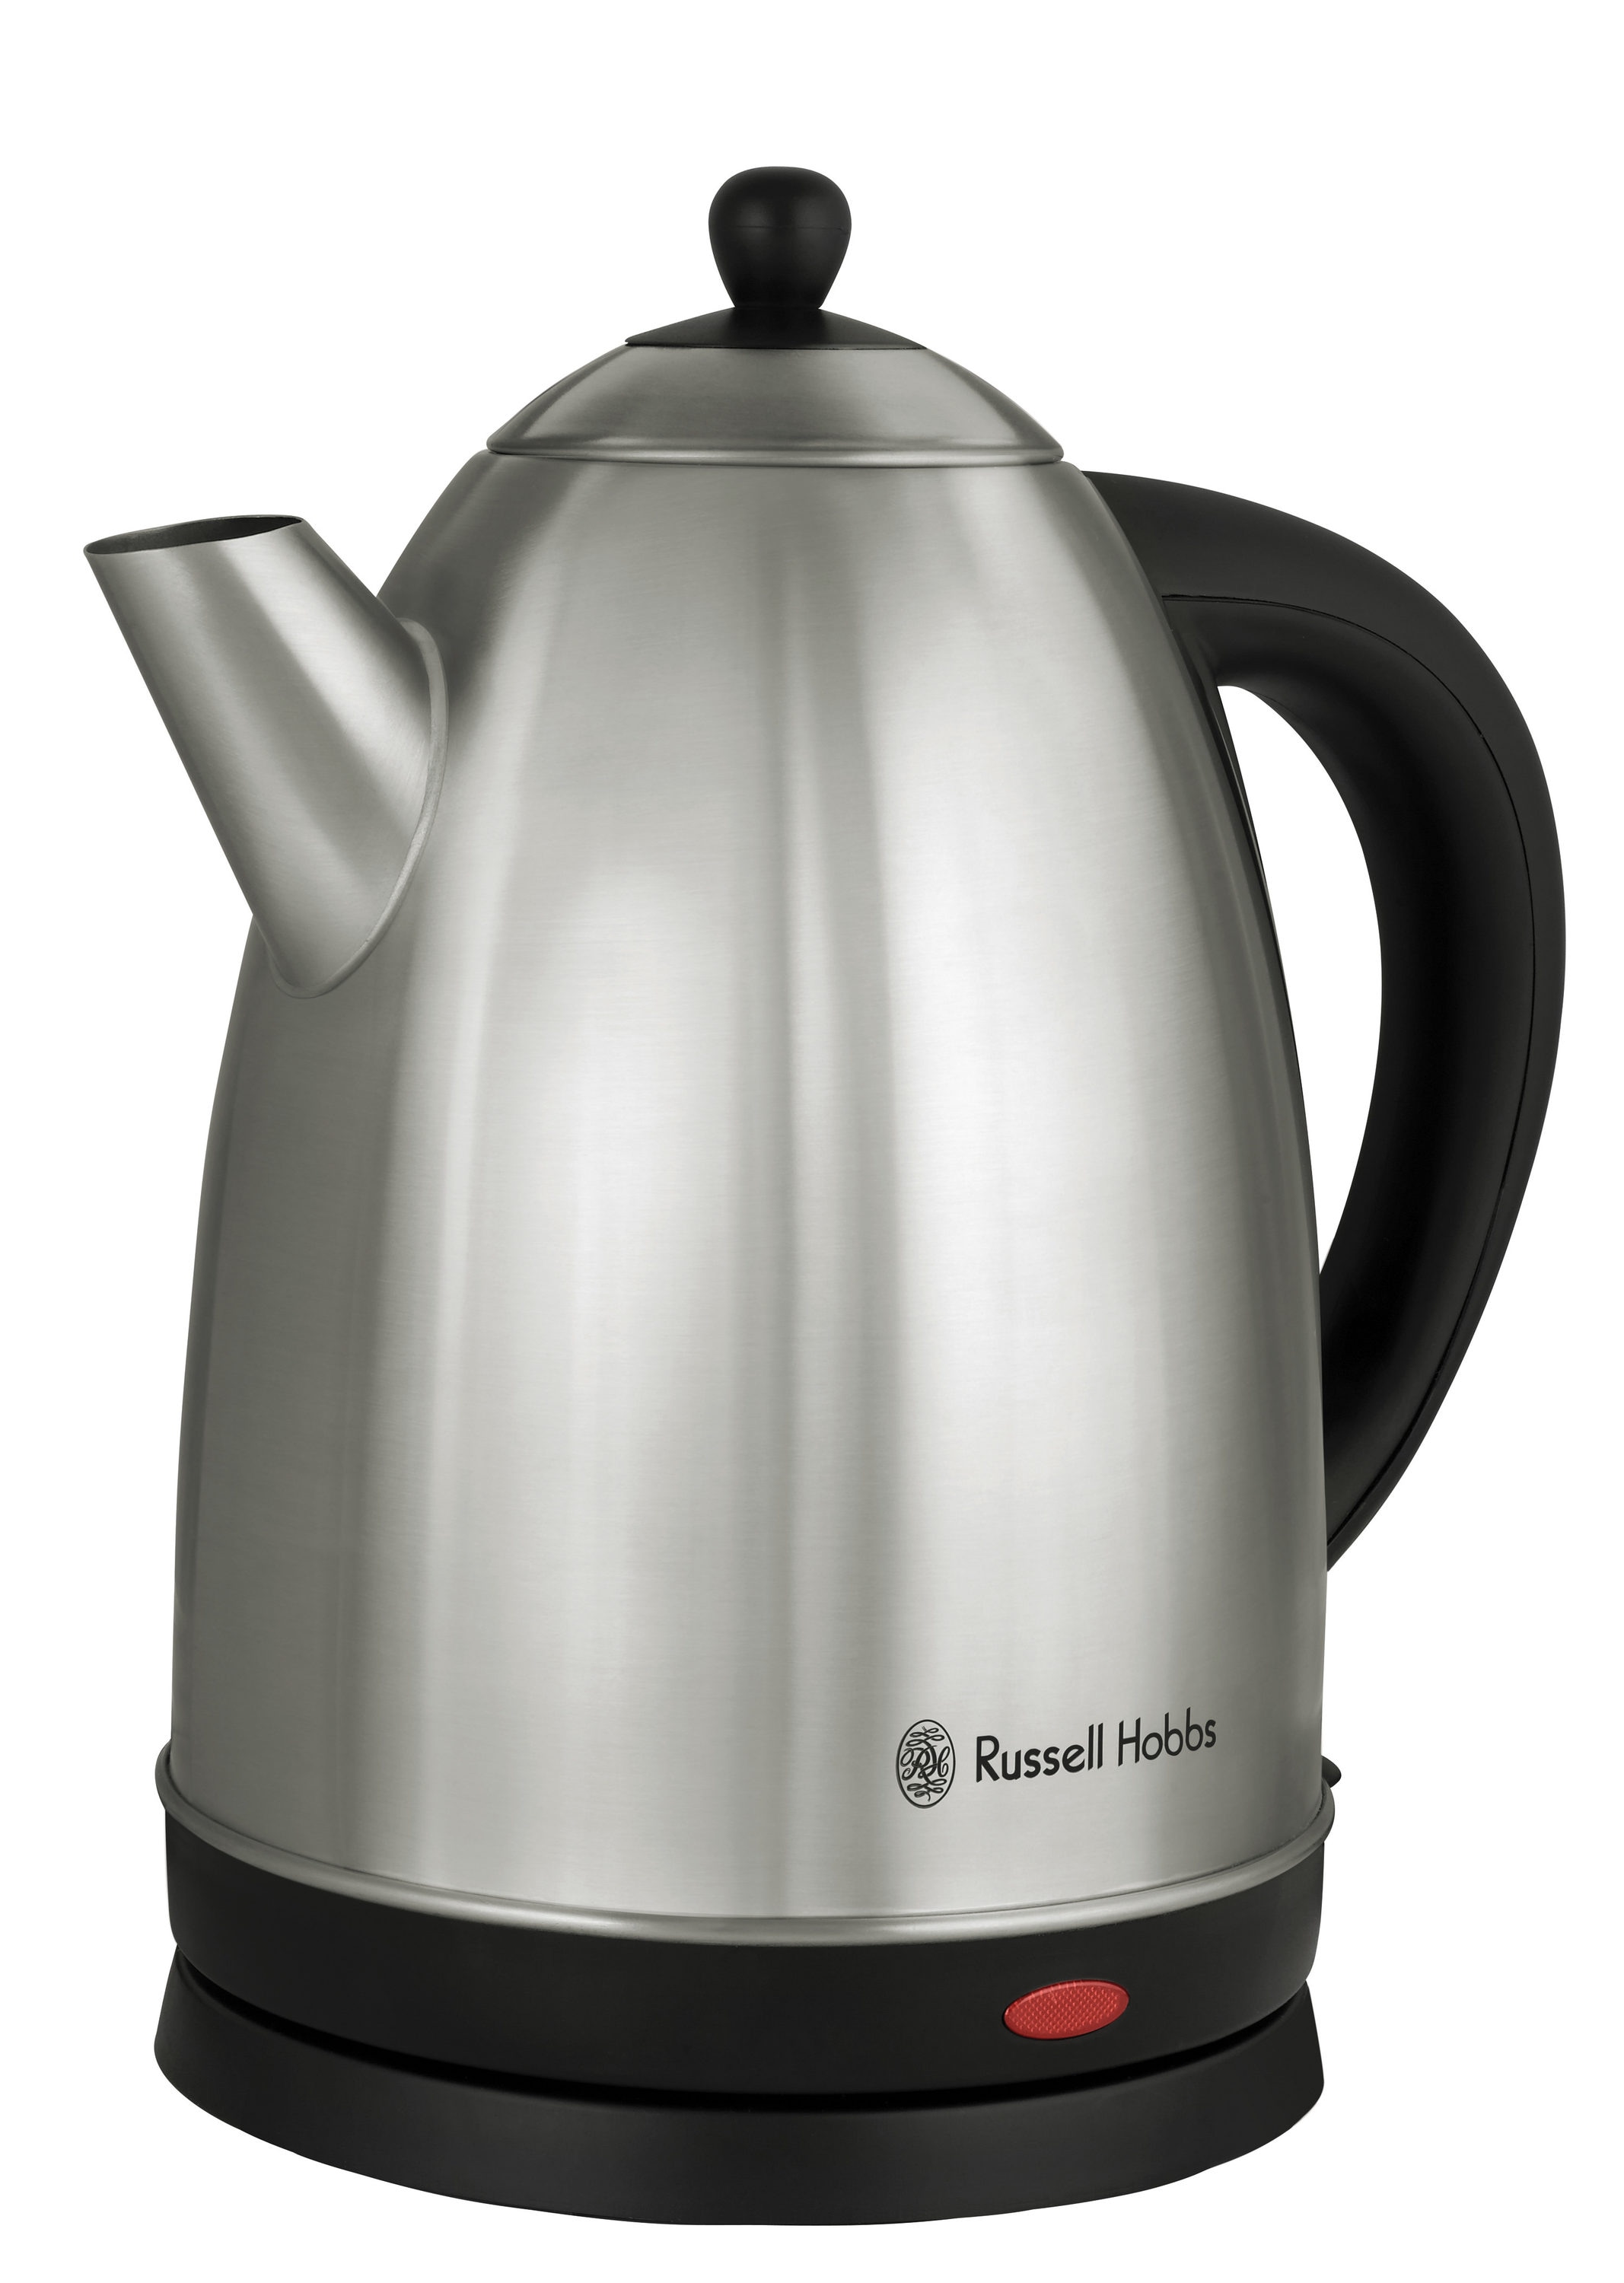 Russell Hobbs RH13552 1-2/3-Liter Stainless-Steel Electric Kettle, Sta